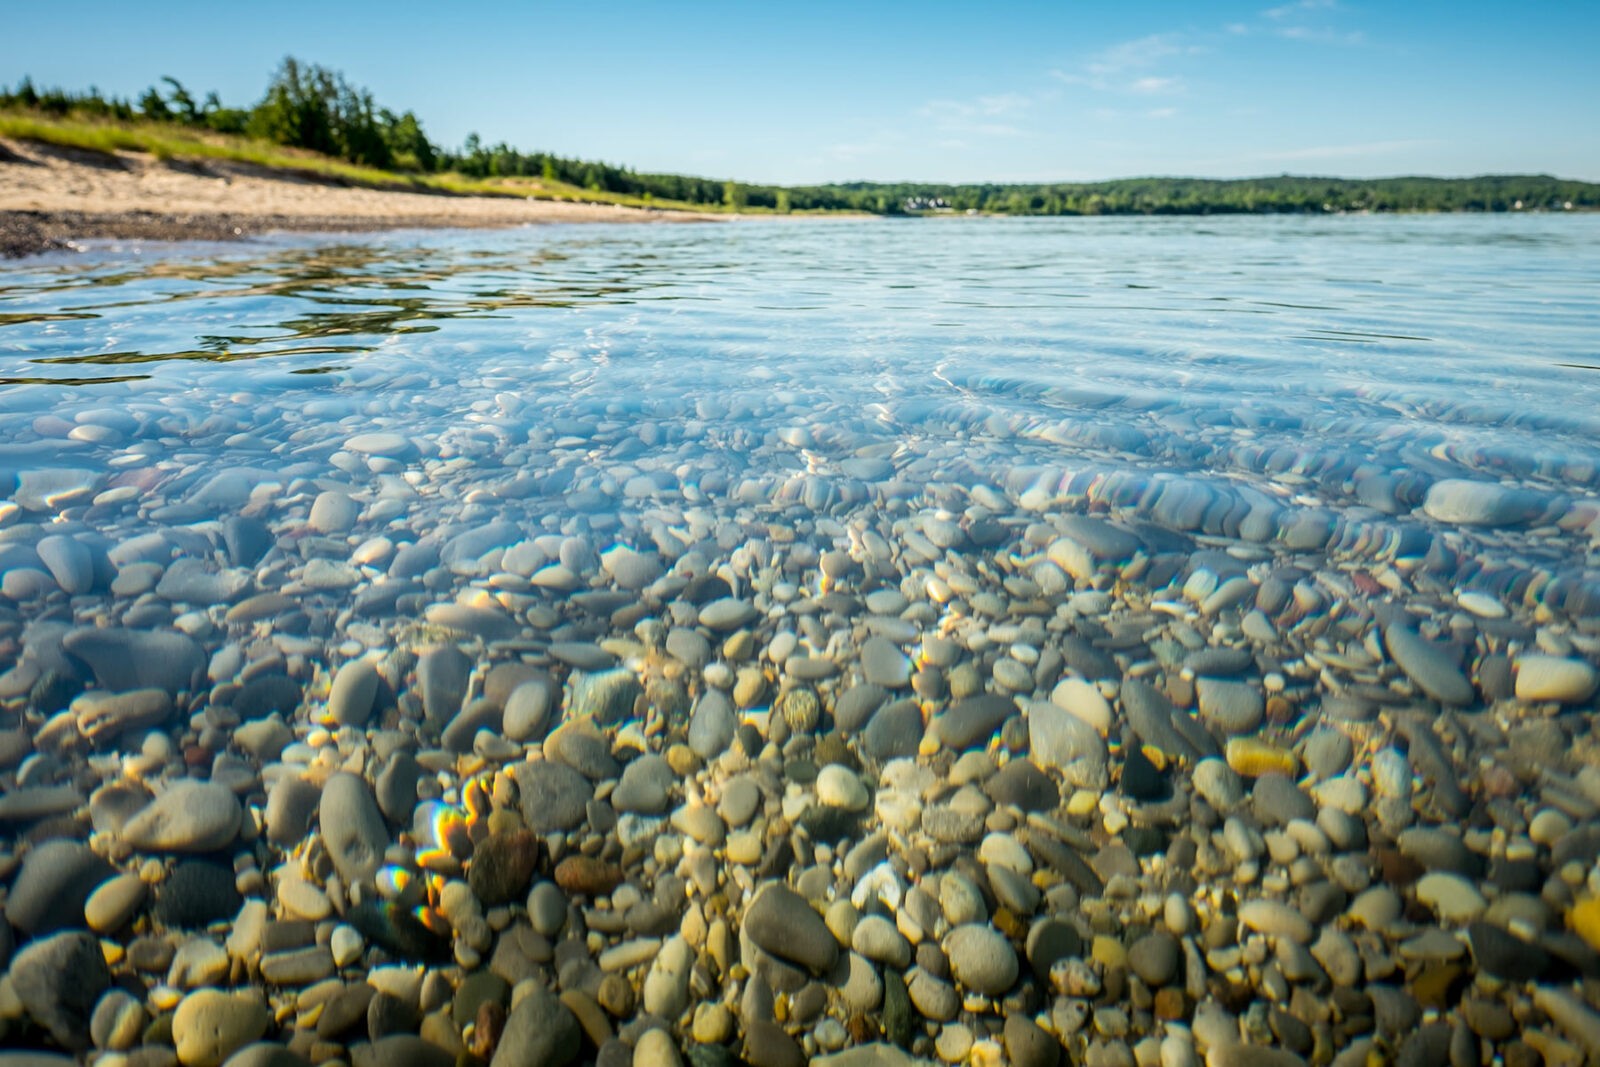 Stones under the water at Petoskey State Park